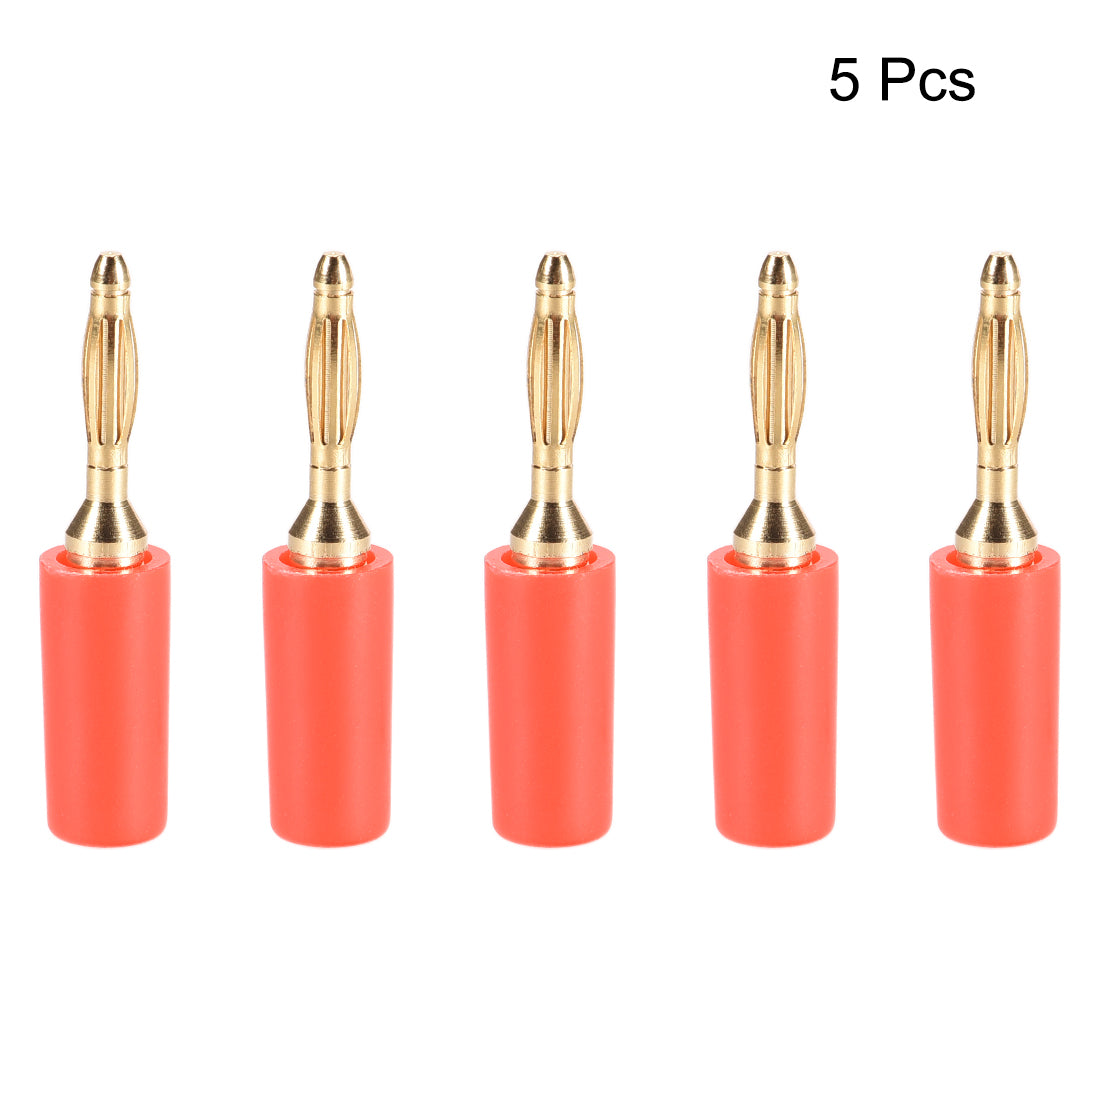 uxcell Uxcell 2mm Banana Speaker Wire Cable Plugs Connectors Gold Red 5pcs Jack Connector